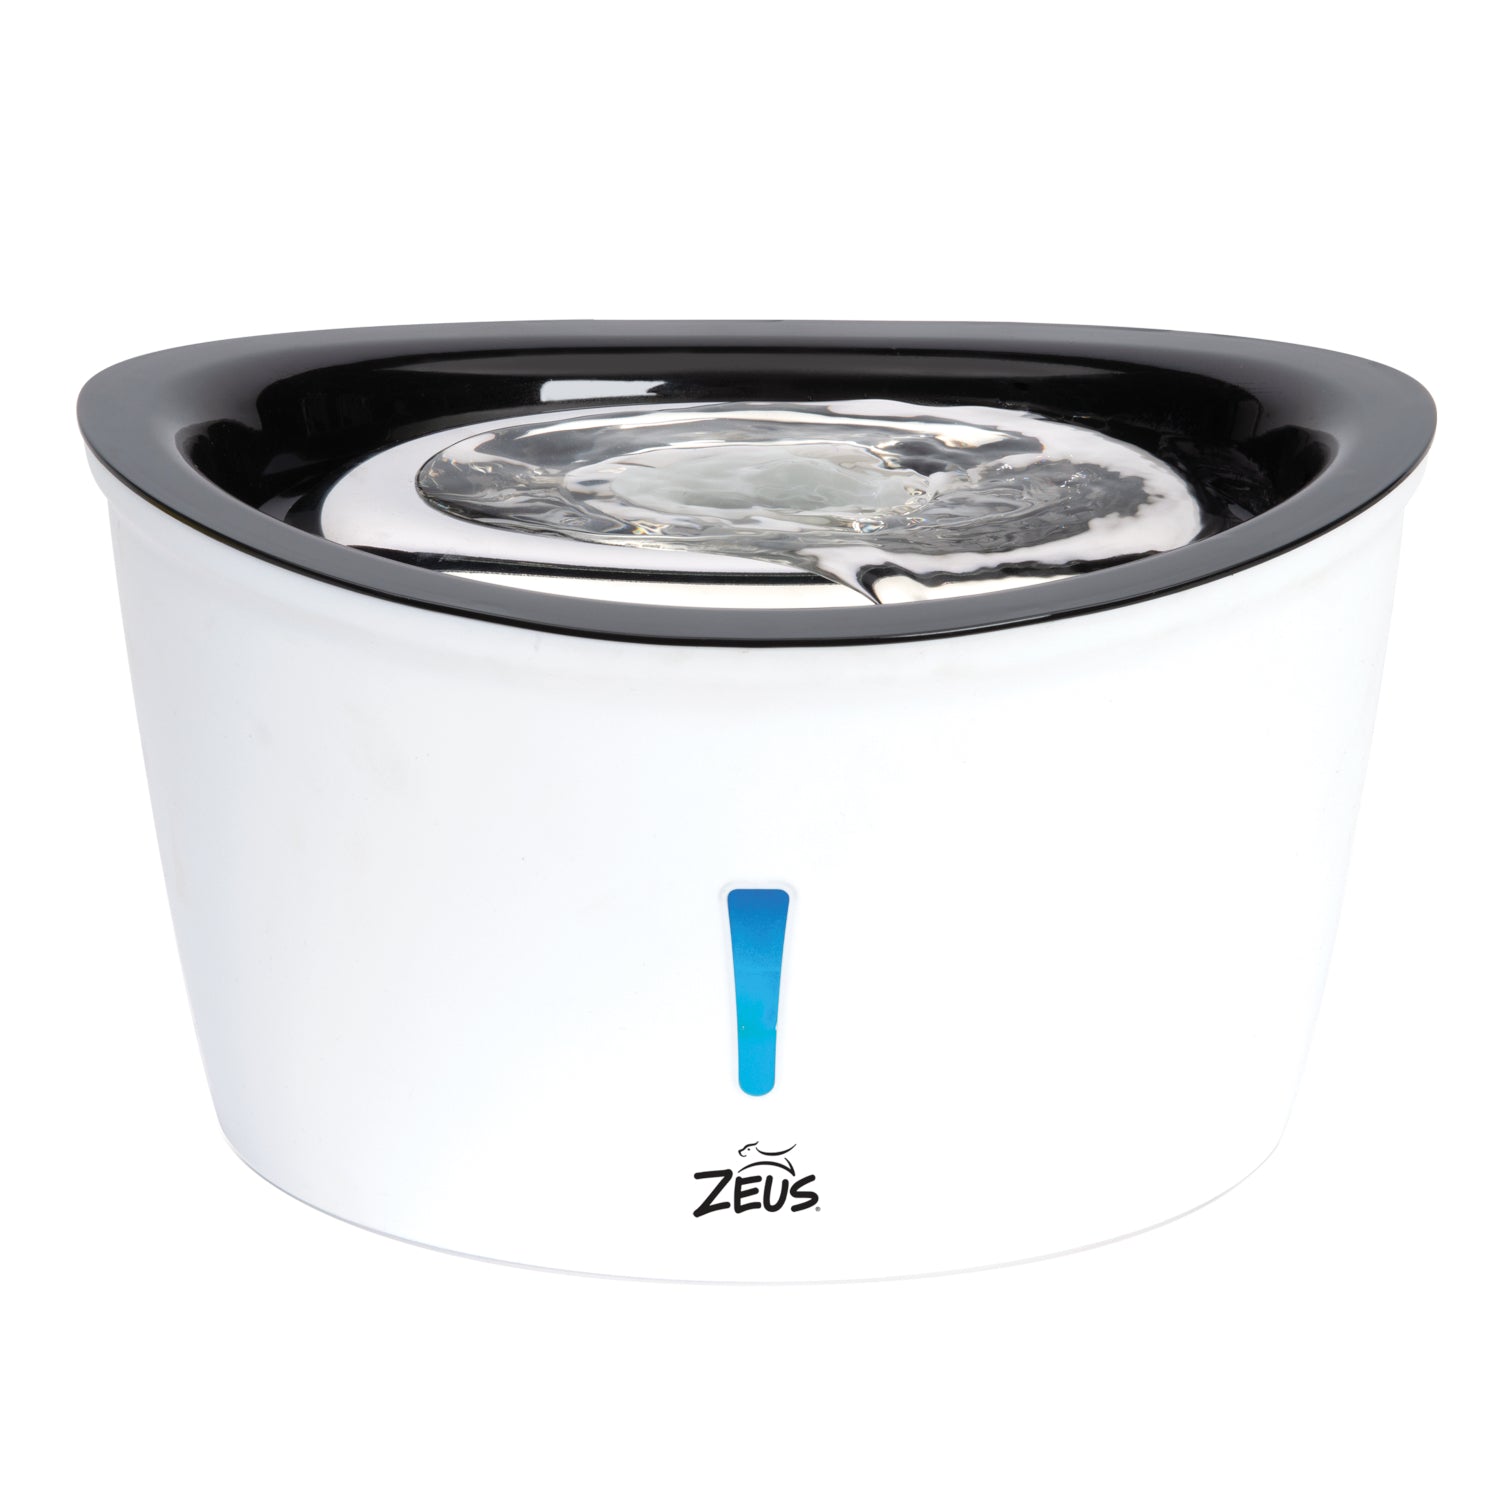 Zeus H2EAU Dog Drinking Fountain Stainless Steel 6L